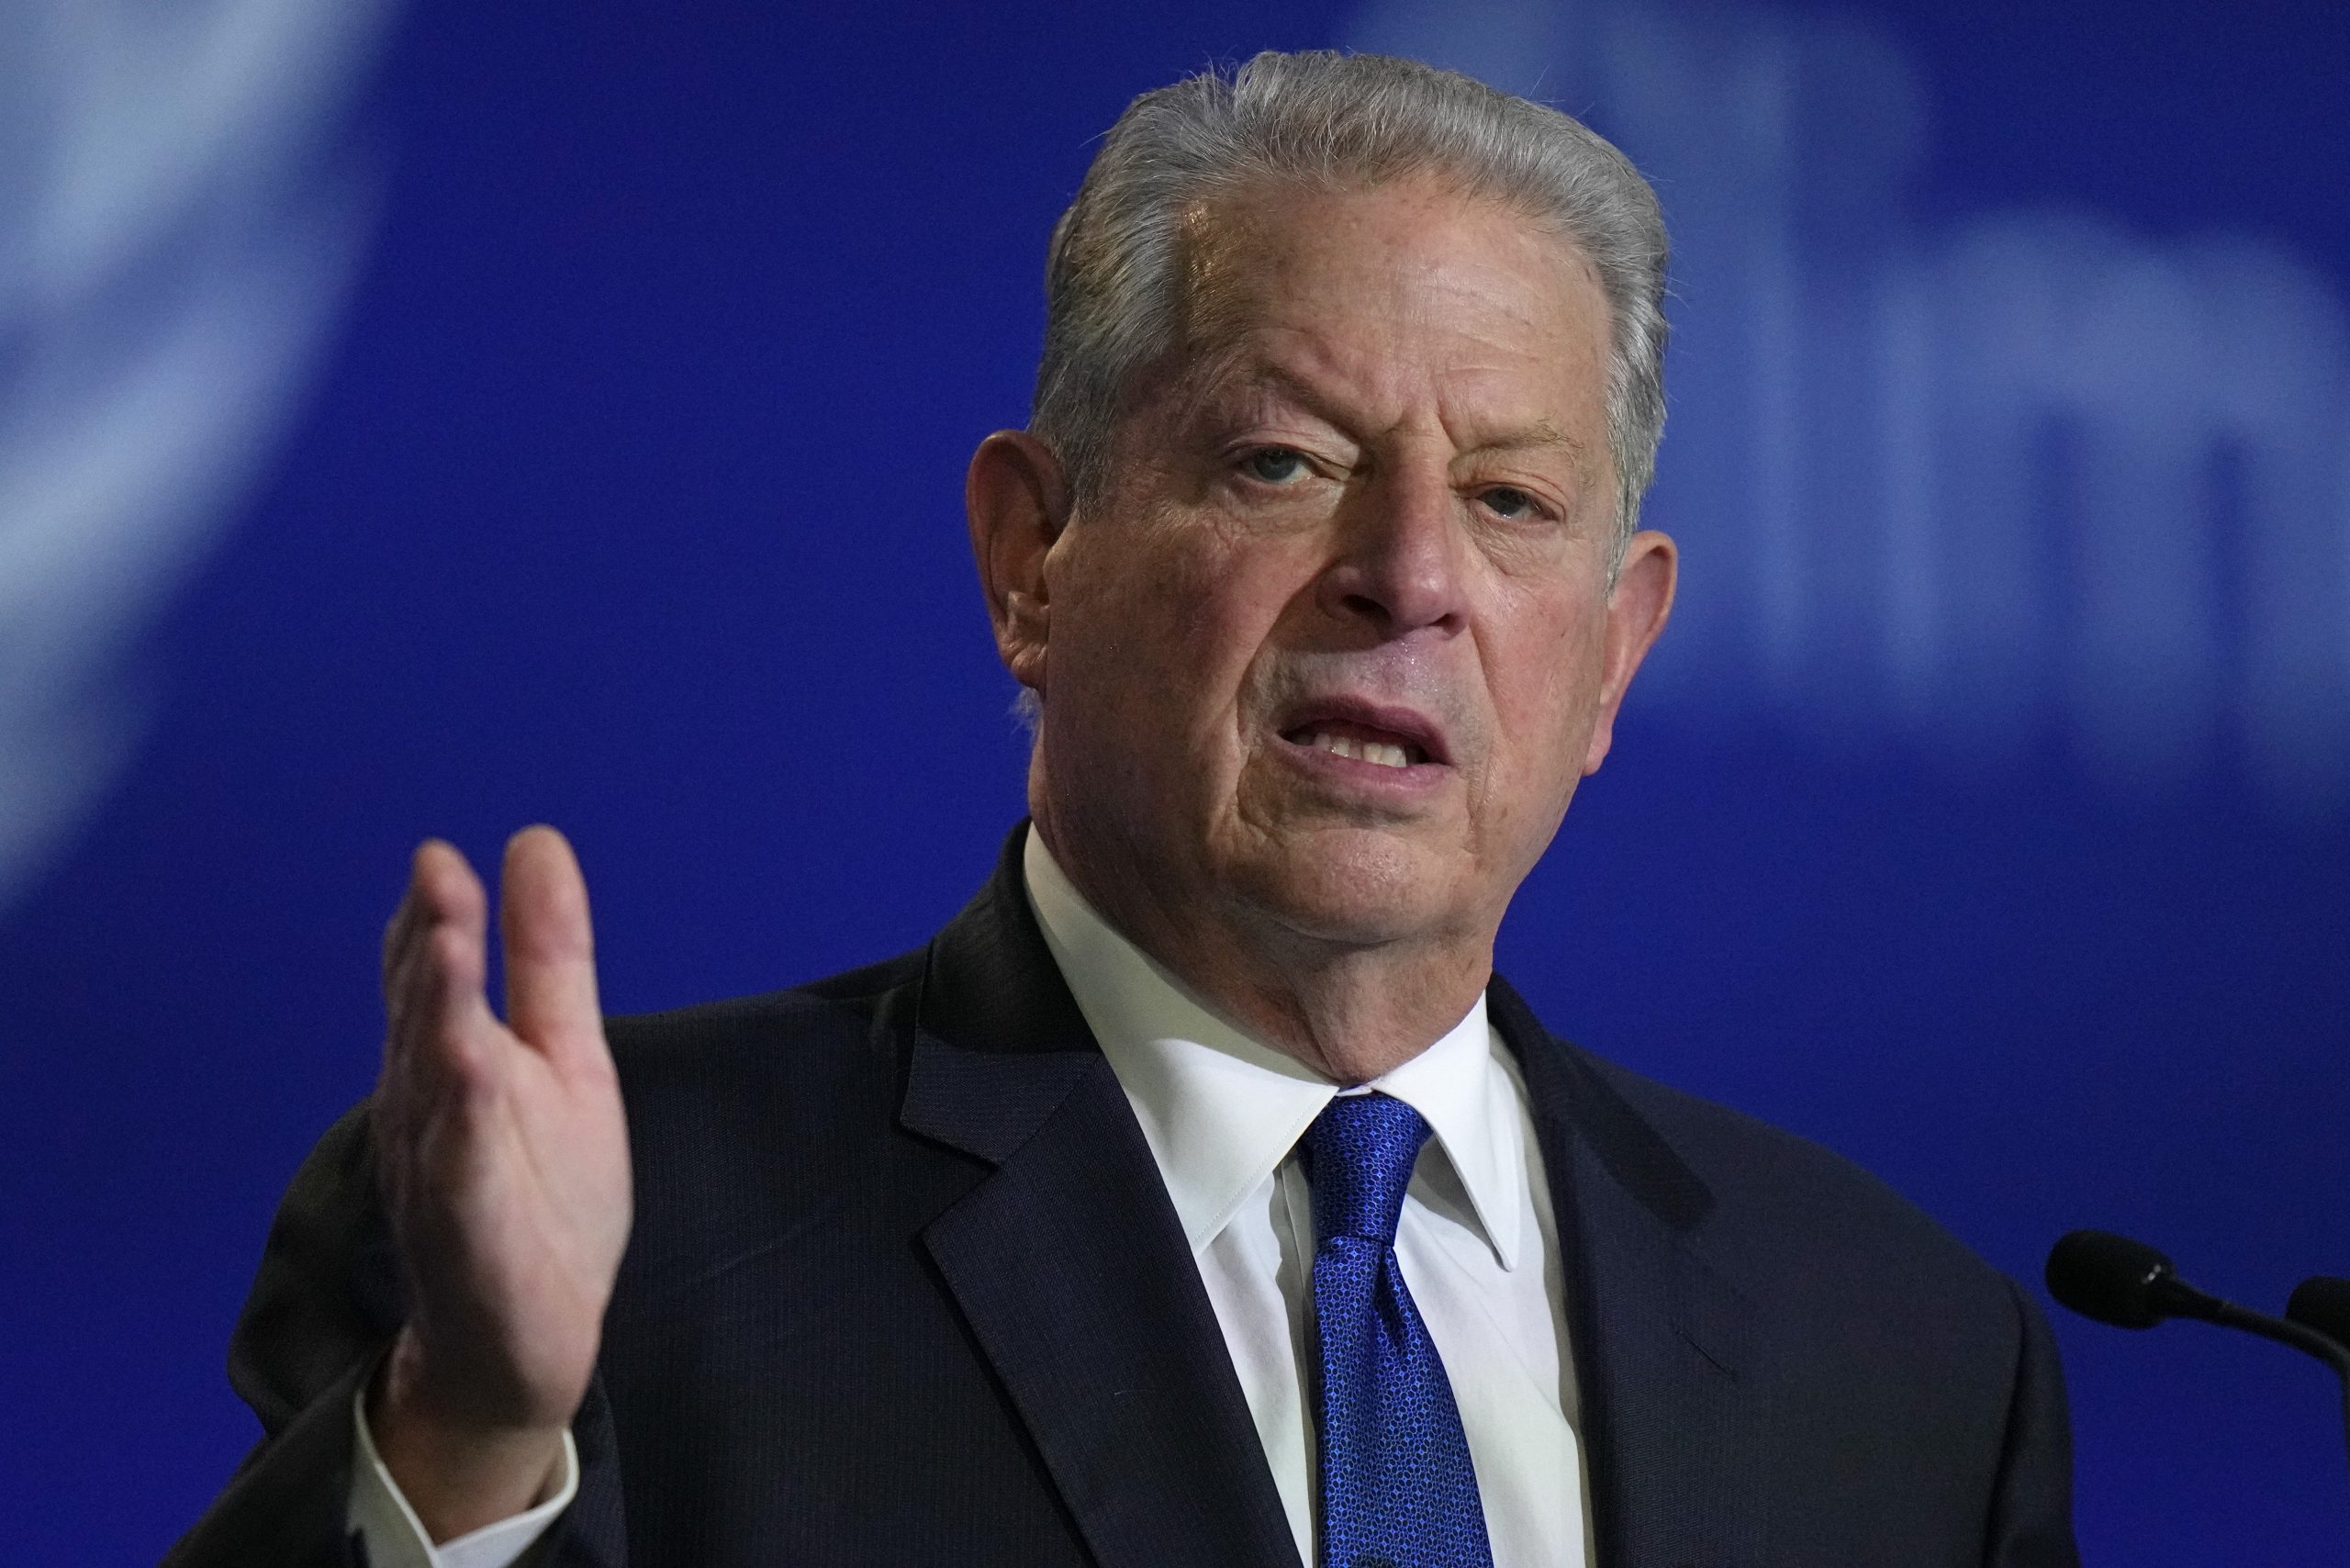 Al Gore compares ‘climate deniers’ to Uvalde police officers